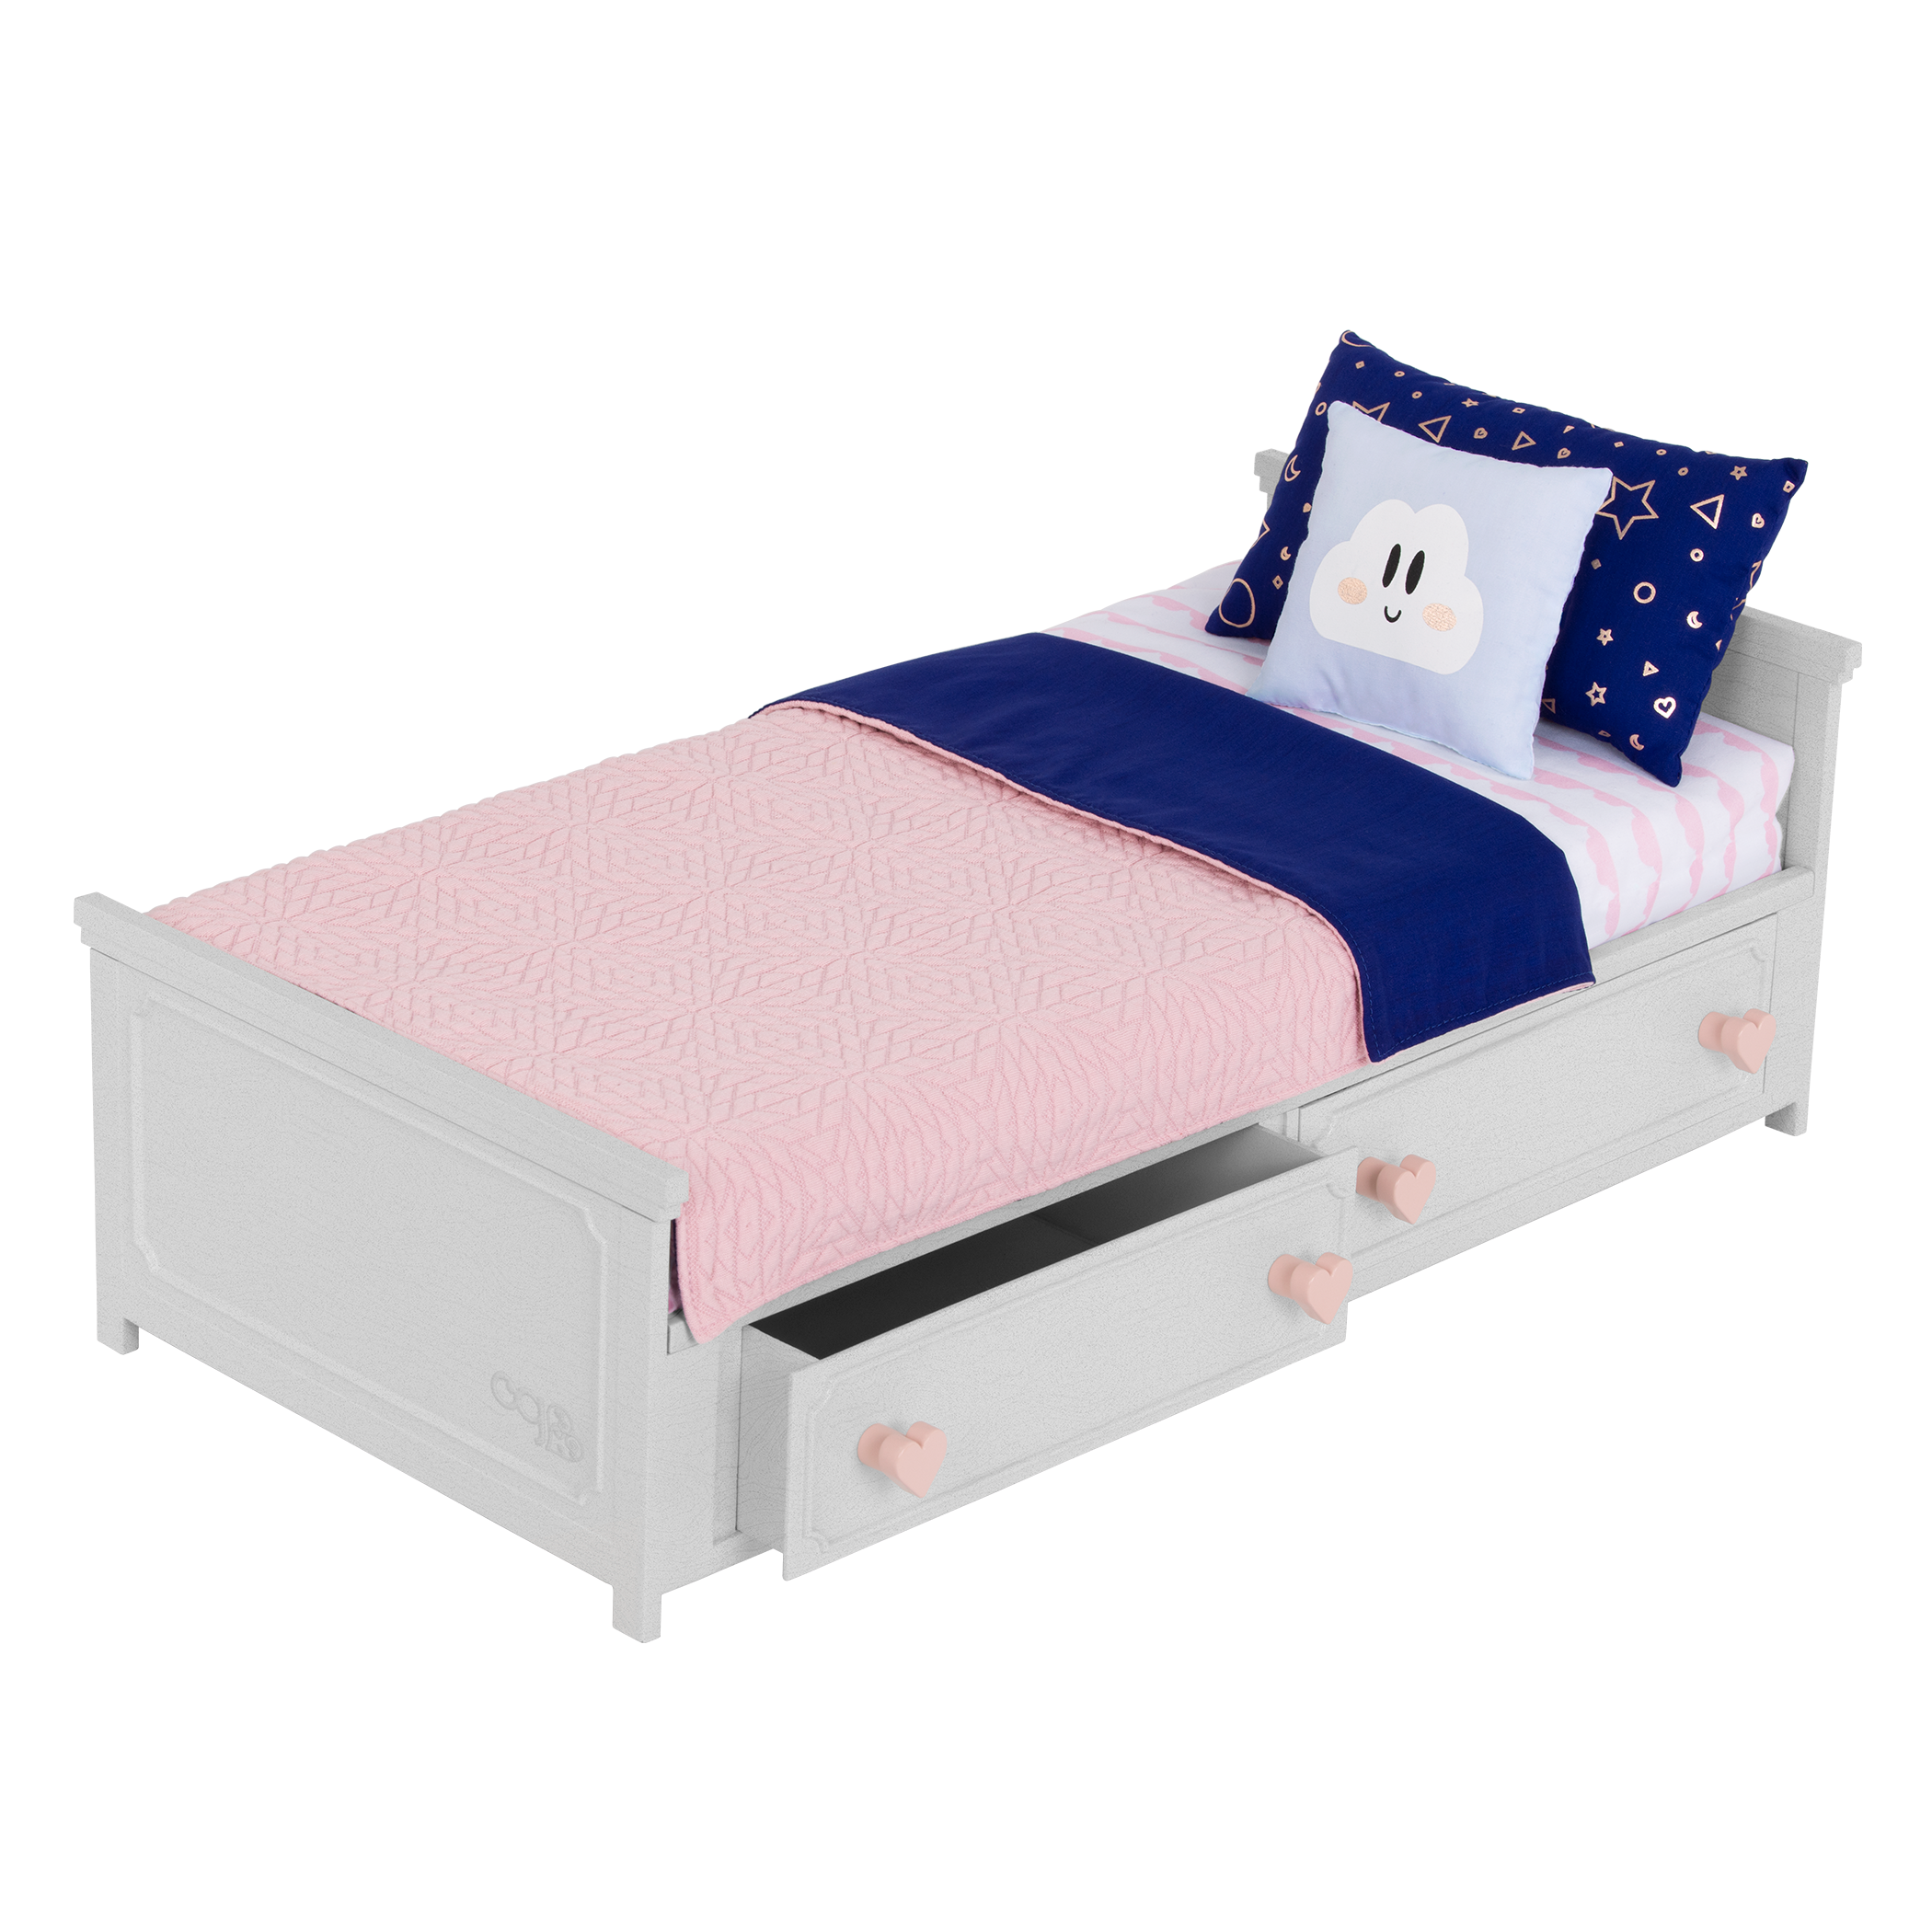 Our Generation Starry Slumbers Platform Bed for 18-inch Dolls 